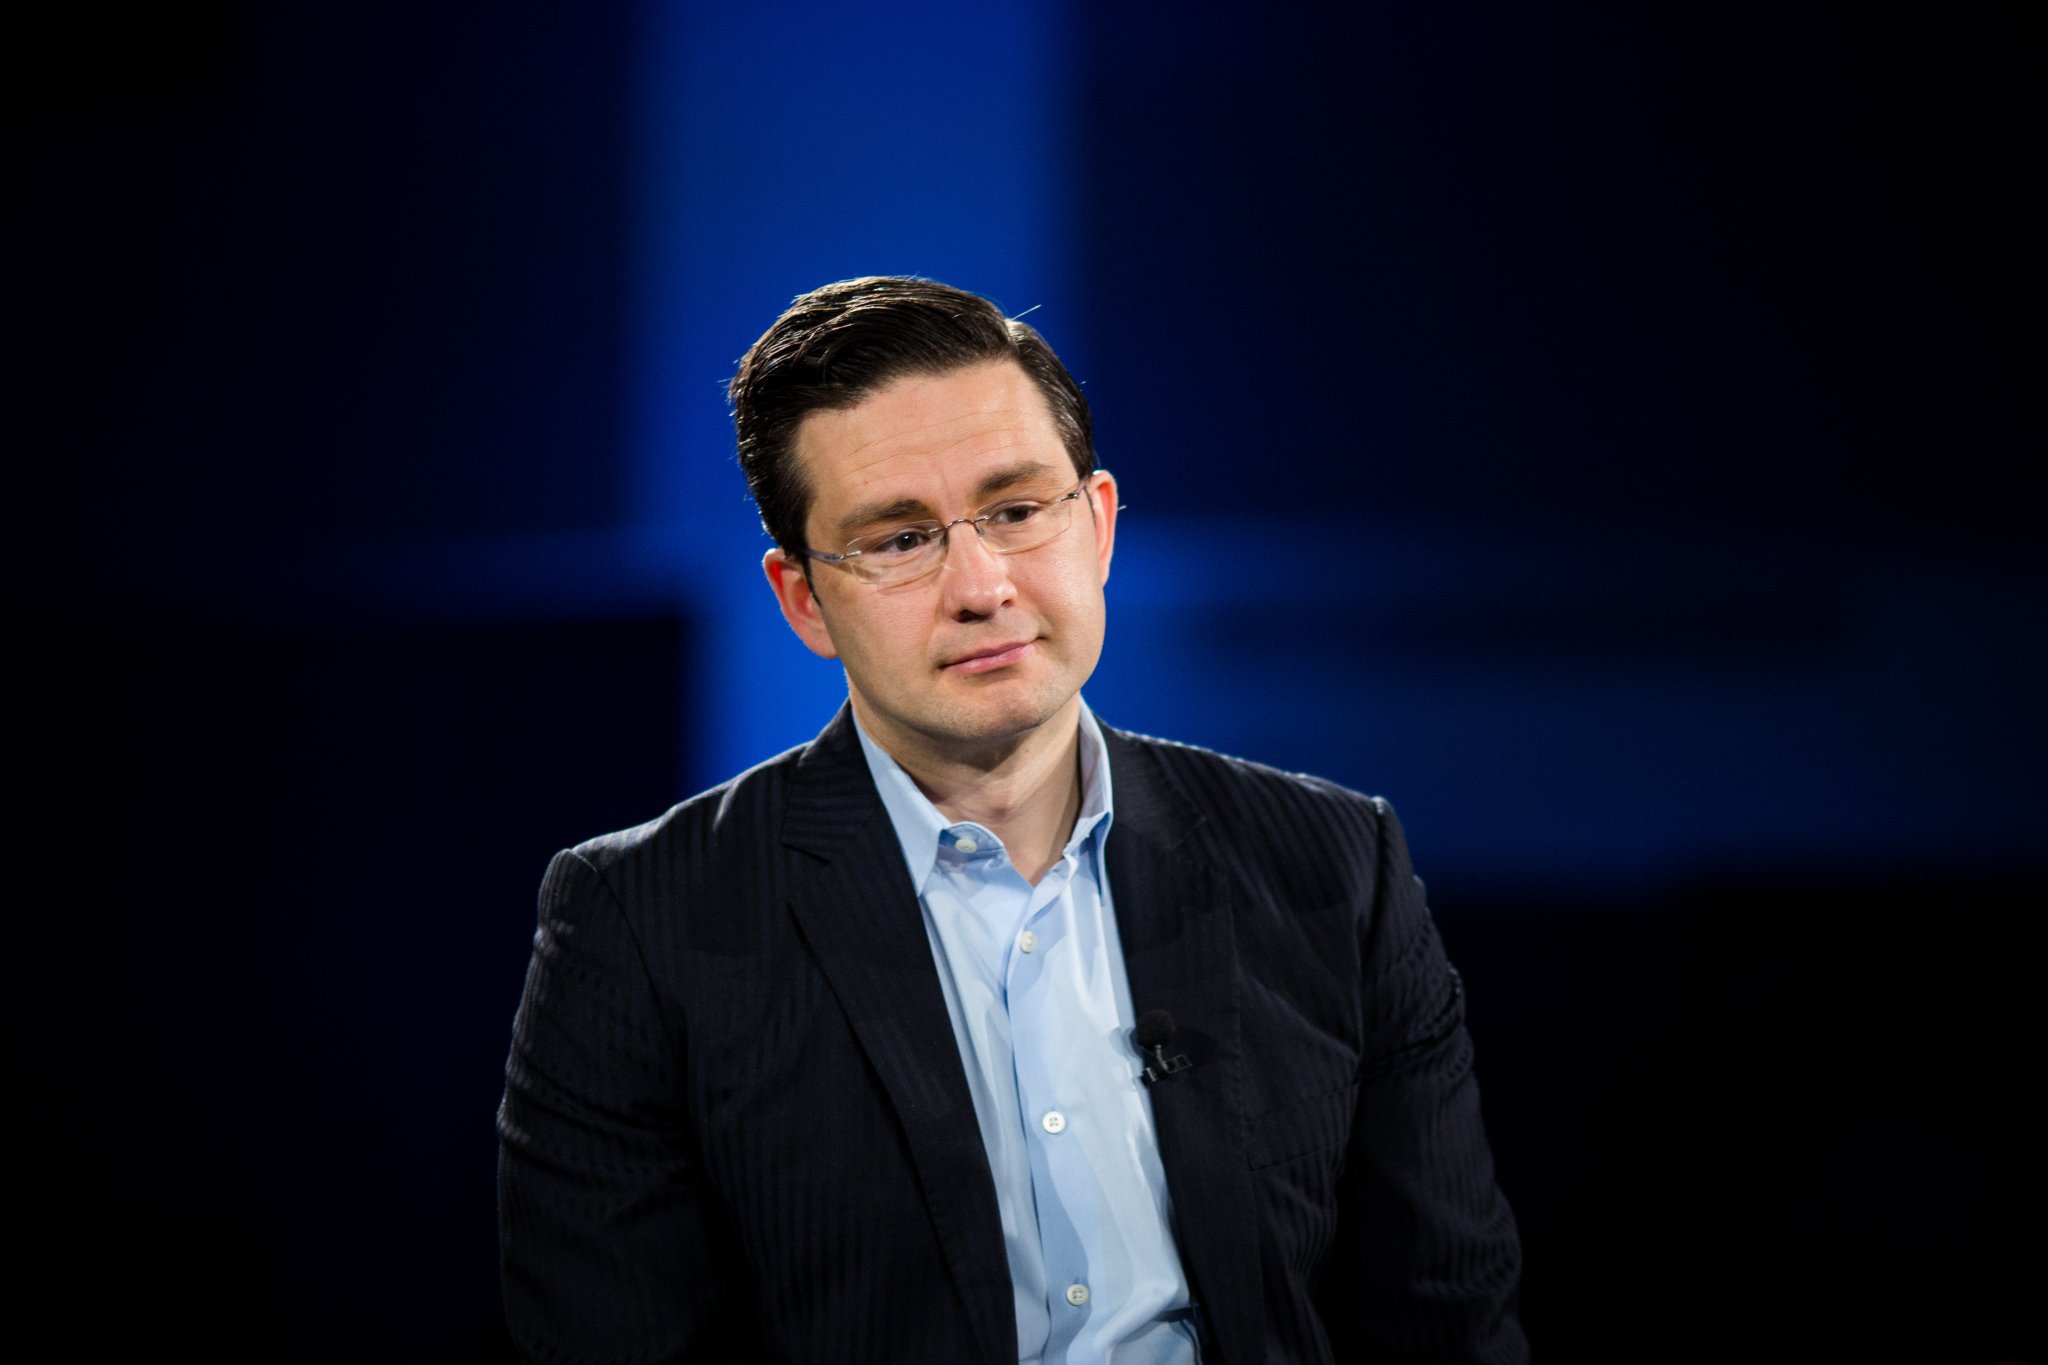 Pierre Poilievre is preferred leader for Conservatives but not Canadians: Leger poll